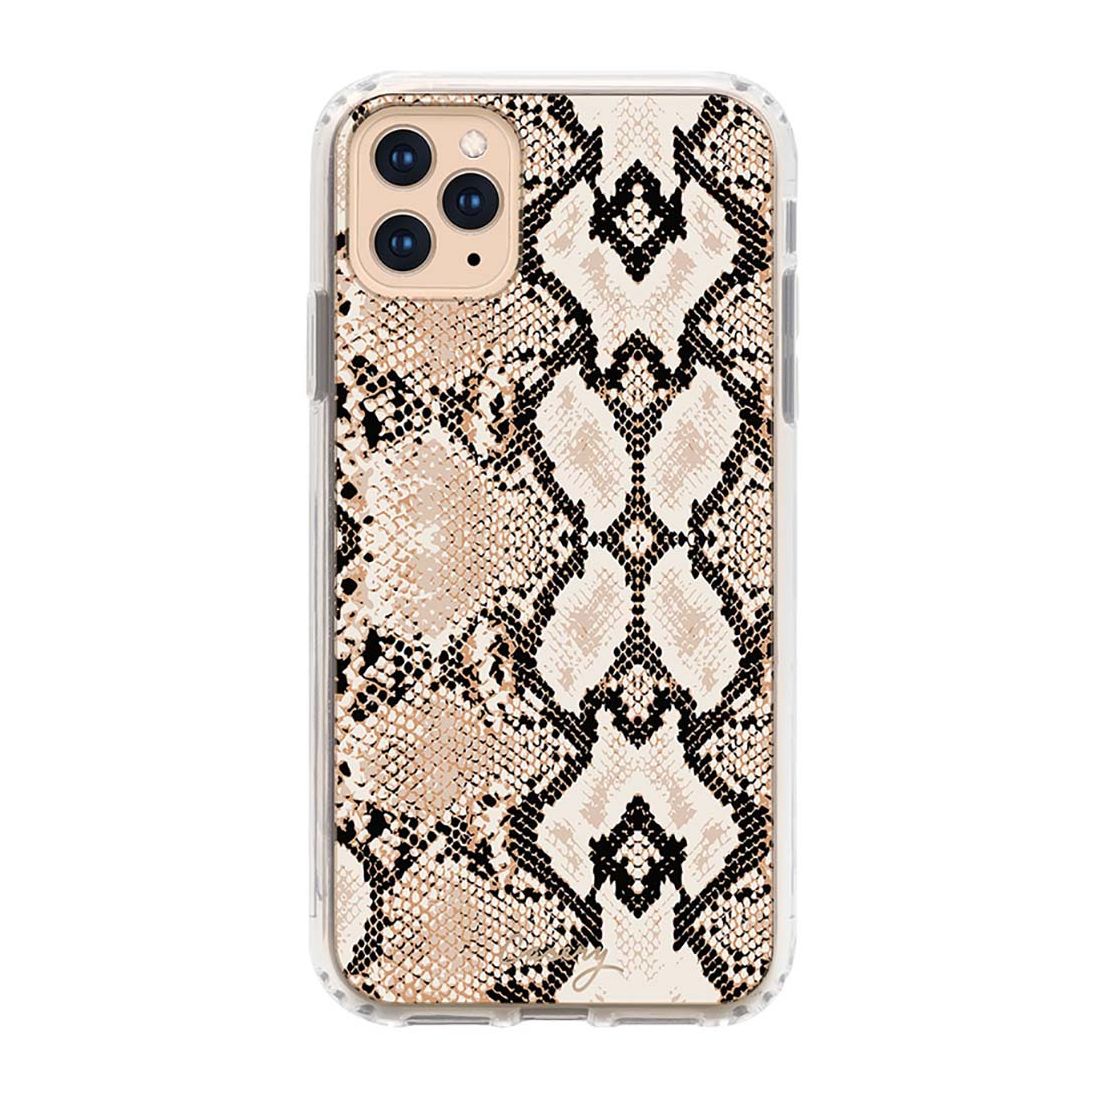 Casery Snake Skin Case for iPhone 12 Pro Max